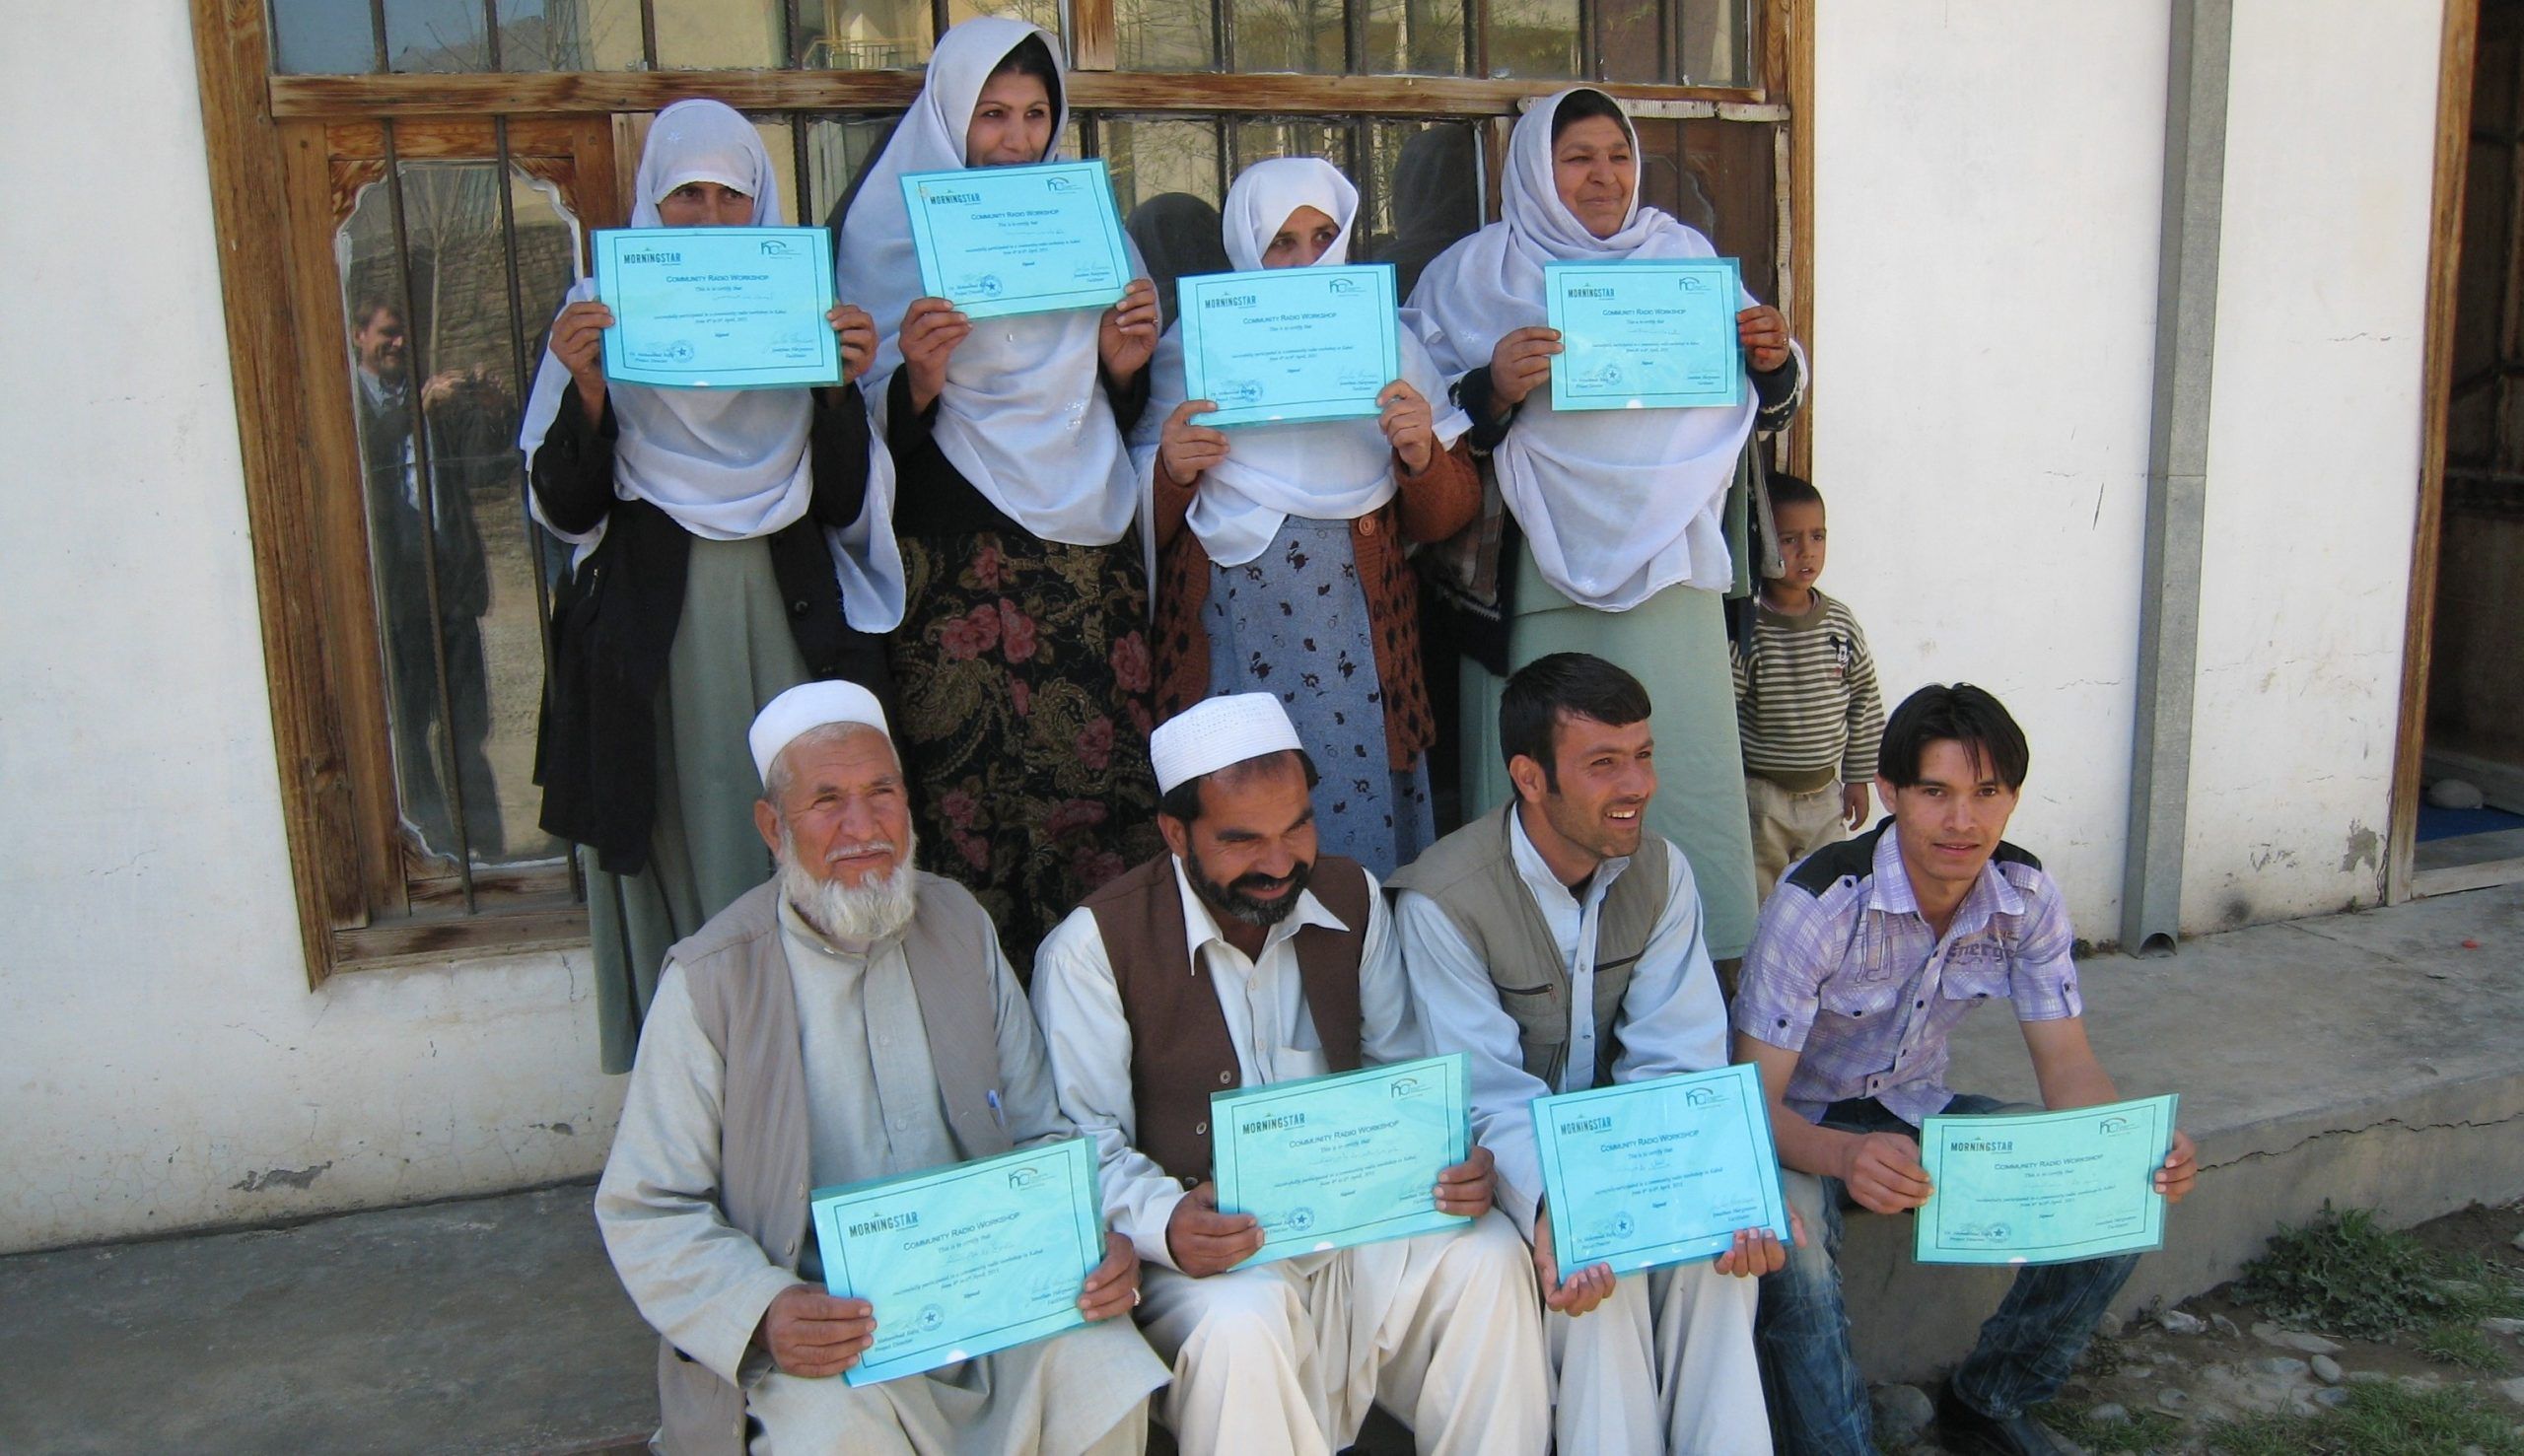 Afghan community health workers proudly displaying their certificates in Community Media after an HCR workshop